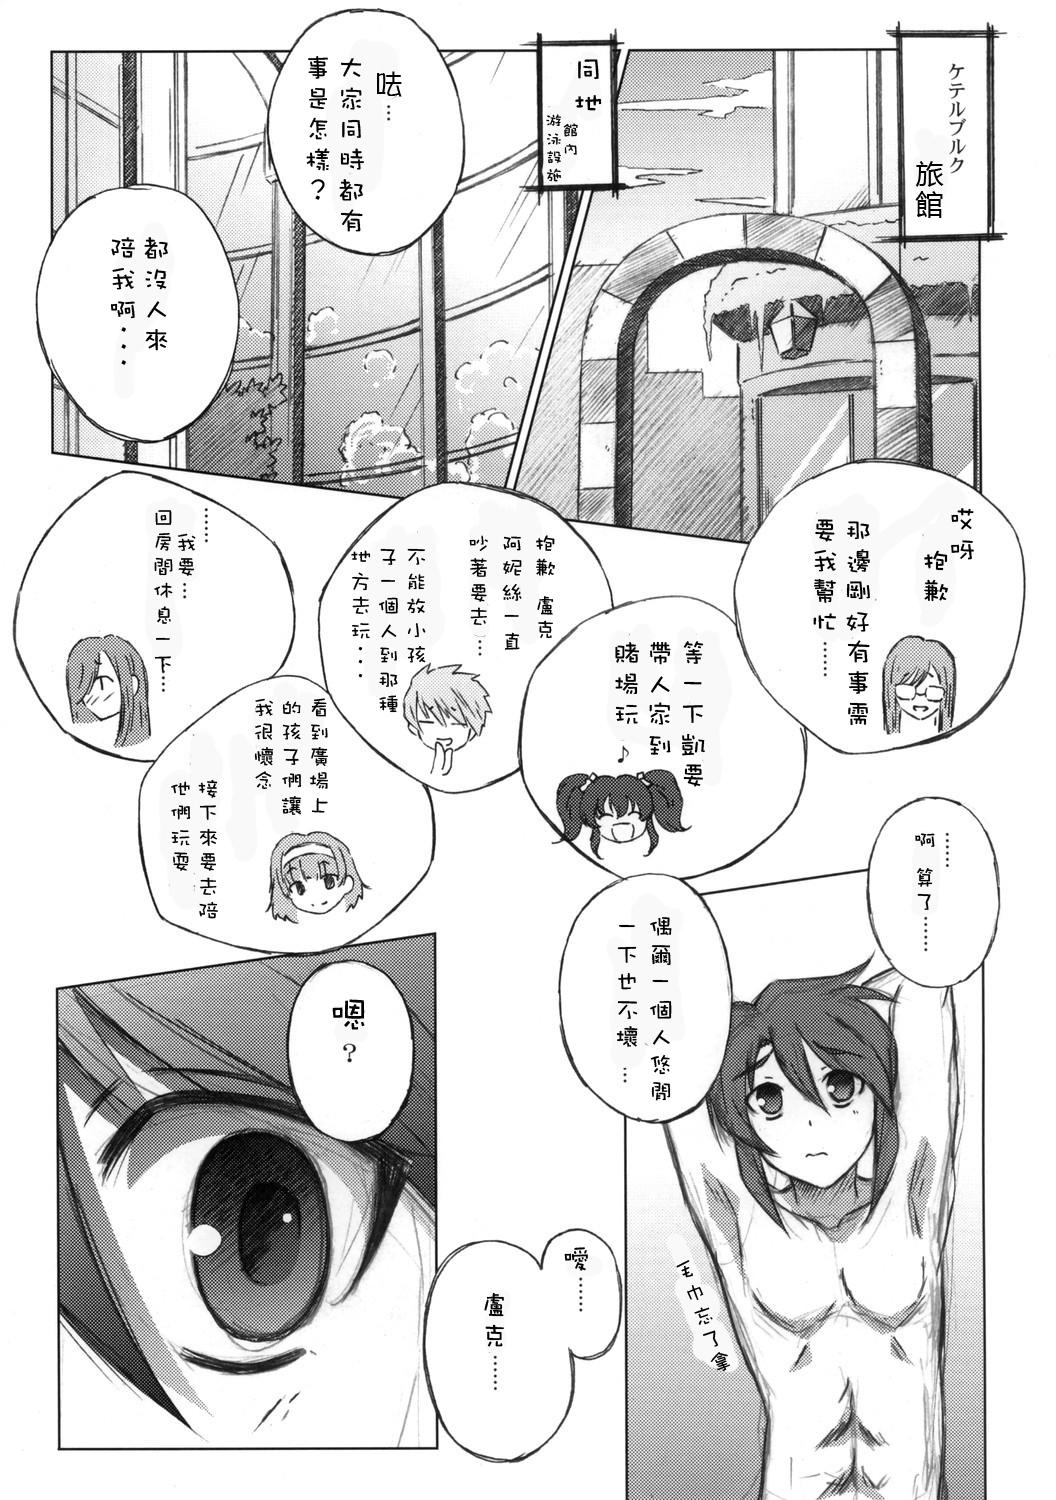 Hotwife Melon ni Melon Melon - Tales of the abyss Anal - Page 4